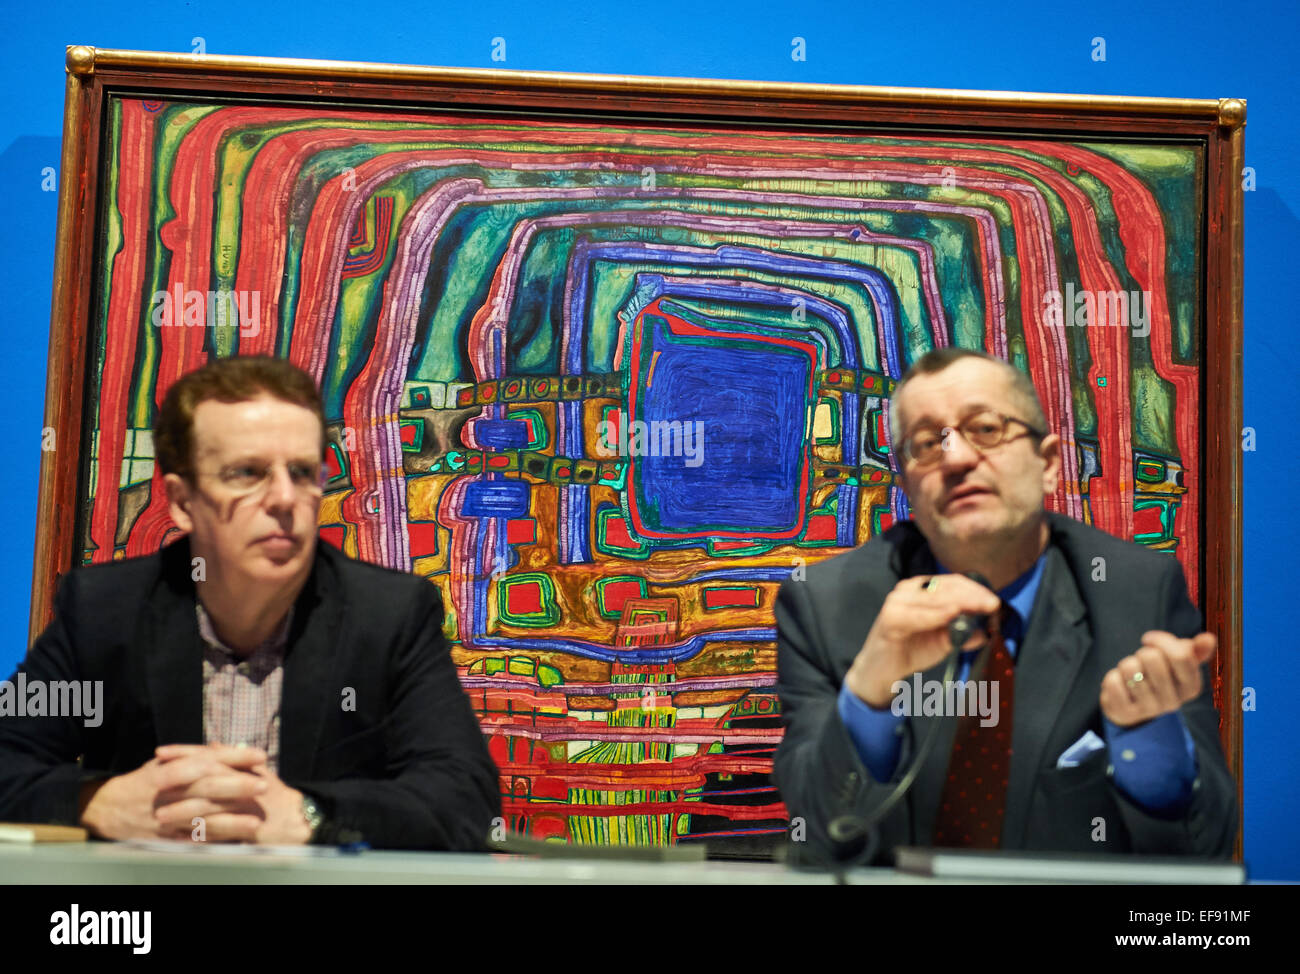 Museum director Tayfun Belgin and his assistant Dietmar Freiesleben (L) speak during a press conference while sitting in front of the painting 'Le je nesais pas encore' at the Osthaus Museum in Hagen, Germany, 29 January 2015. The exhibition 'Hundertwasser Lebenslinien' presents 130 paintings by Friedenreich Hundertwasser. According to informations by the Museum, the exhibition is the universal artists first comprehensive retrospective in Germany since 17 years. It's open from 1 February until 10 May 2015. PHOTO: BERND THISSEN/dpa Stock Photo